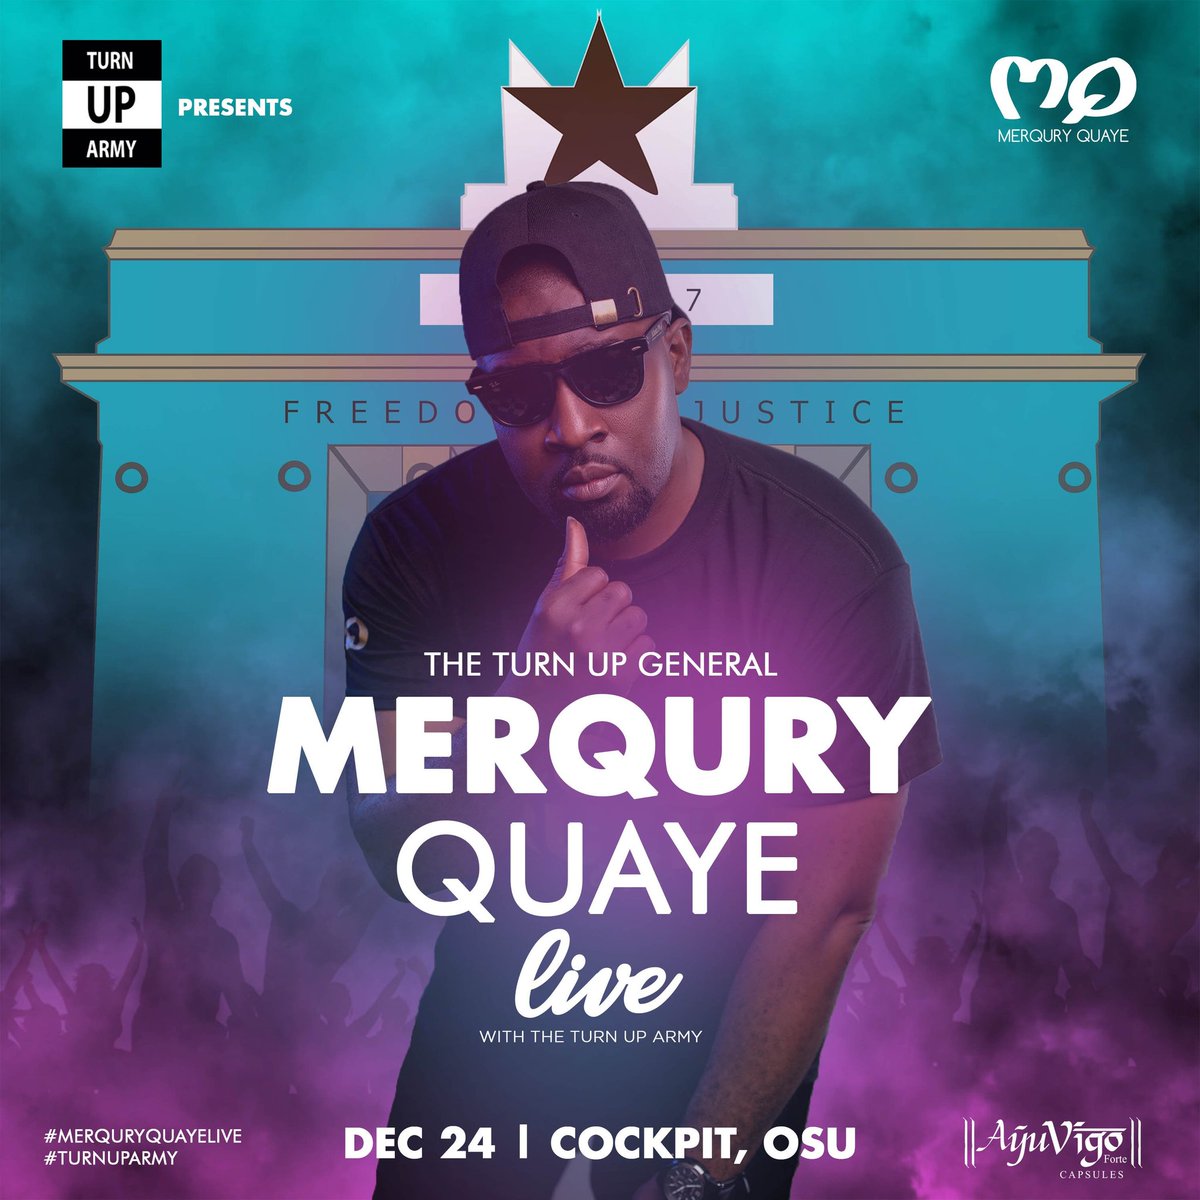 Cockpit ooooooooooo Cockpit, tomorrow ooooooooo be tomorrow. We go spoil our body till we borjor.... #MerquryQuayeLive #TurnUpArmy